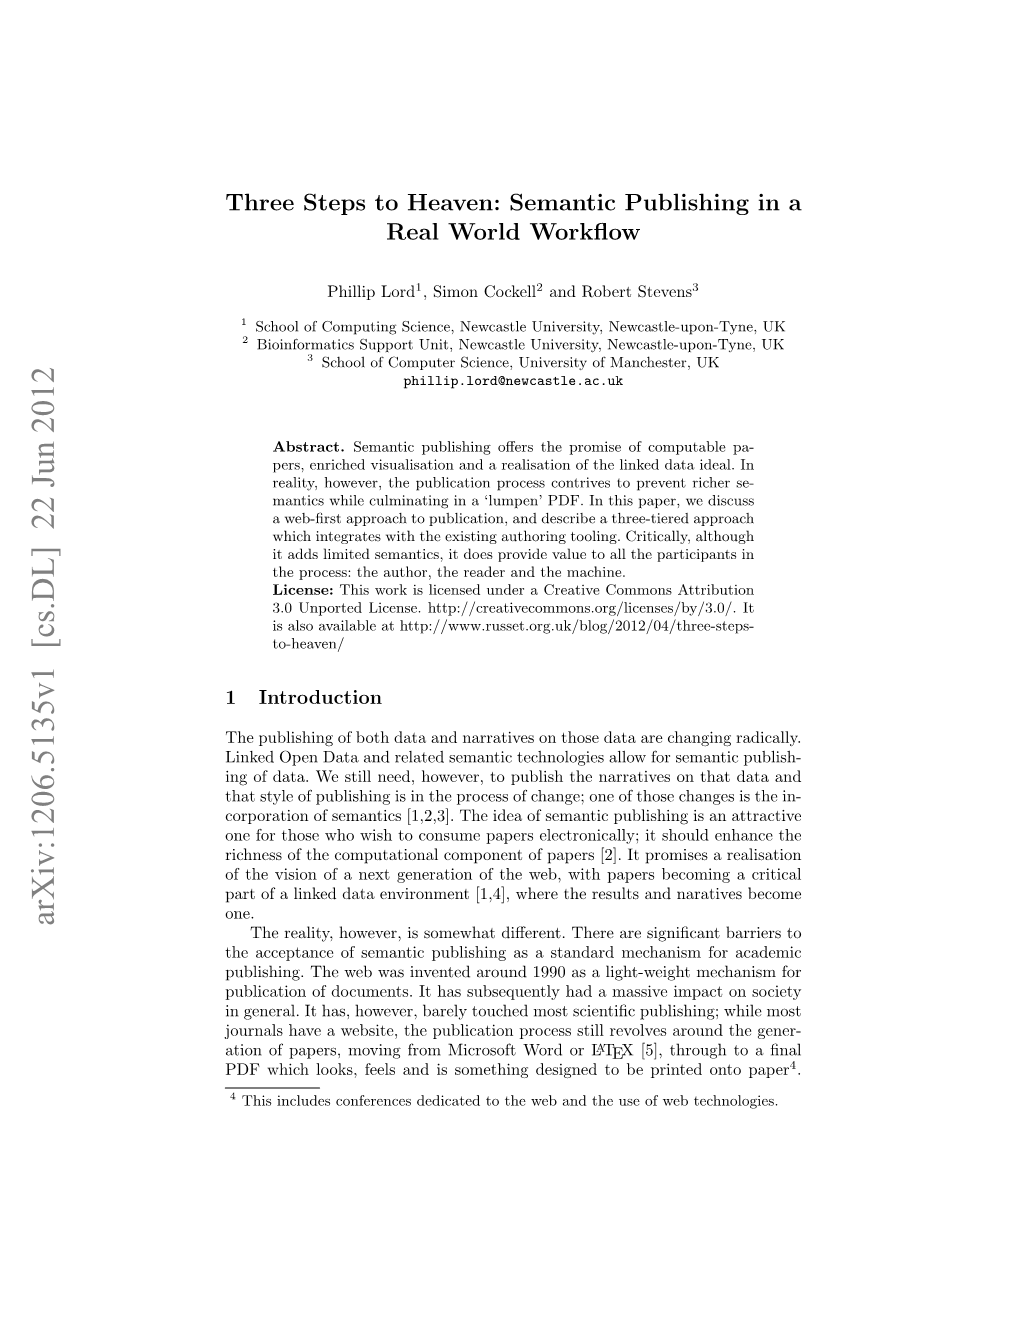 Three Steps to Heaven: Semantic Publishing in a Real World Workflow